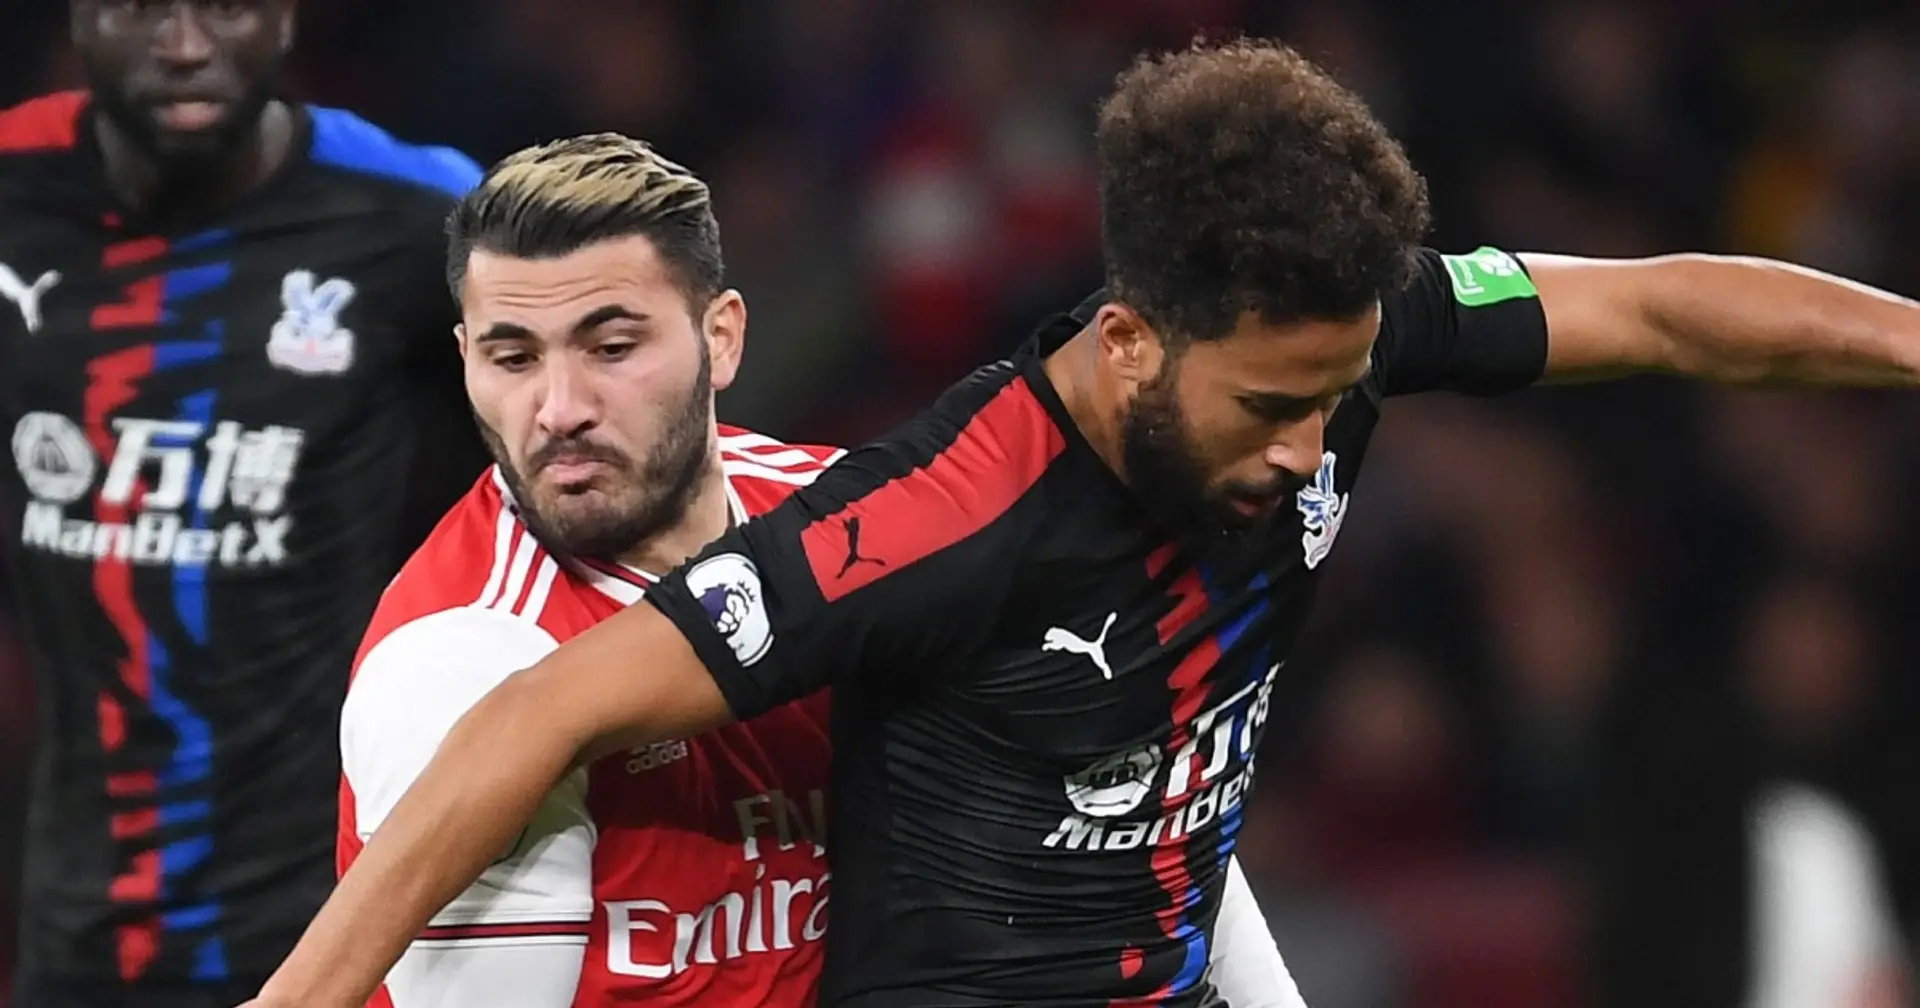 'For a second I was worried he'd batter me!' Andros Townsend hilariously recalls bust-up with Kolasinac